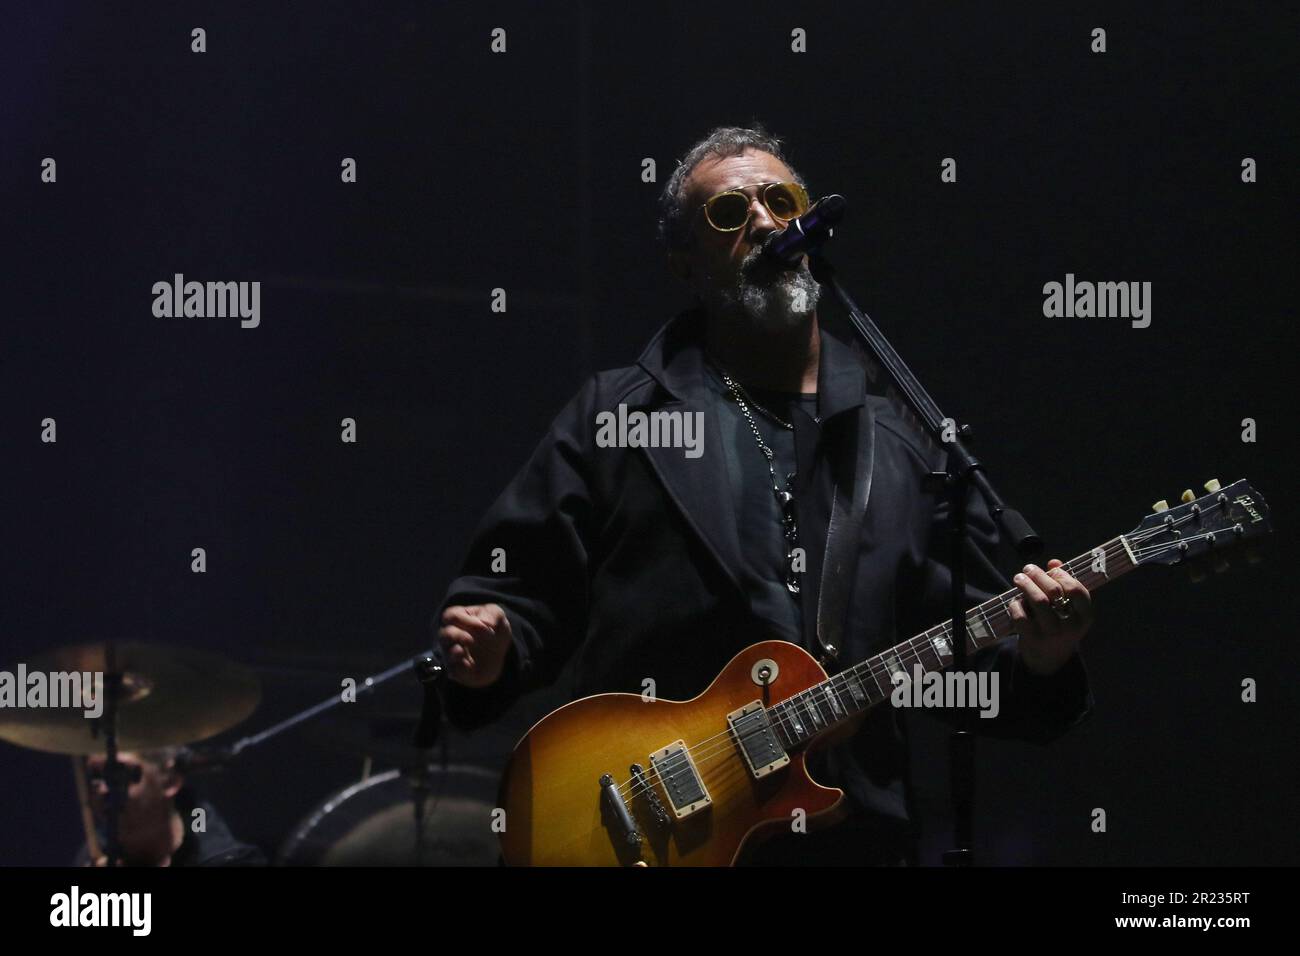 May 12, 2023, Mexico City, Mexico: Ismael 'Tito' Fuentes member of Mexican band Molotov performs on stage as part of their ‘EstallaMolotov’ tour at Foro Sol. on May 12, 2023 in Mexico City, Mexico. (Photo by Ismael Rosas/ Eyepix Group) Stock Photo